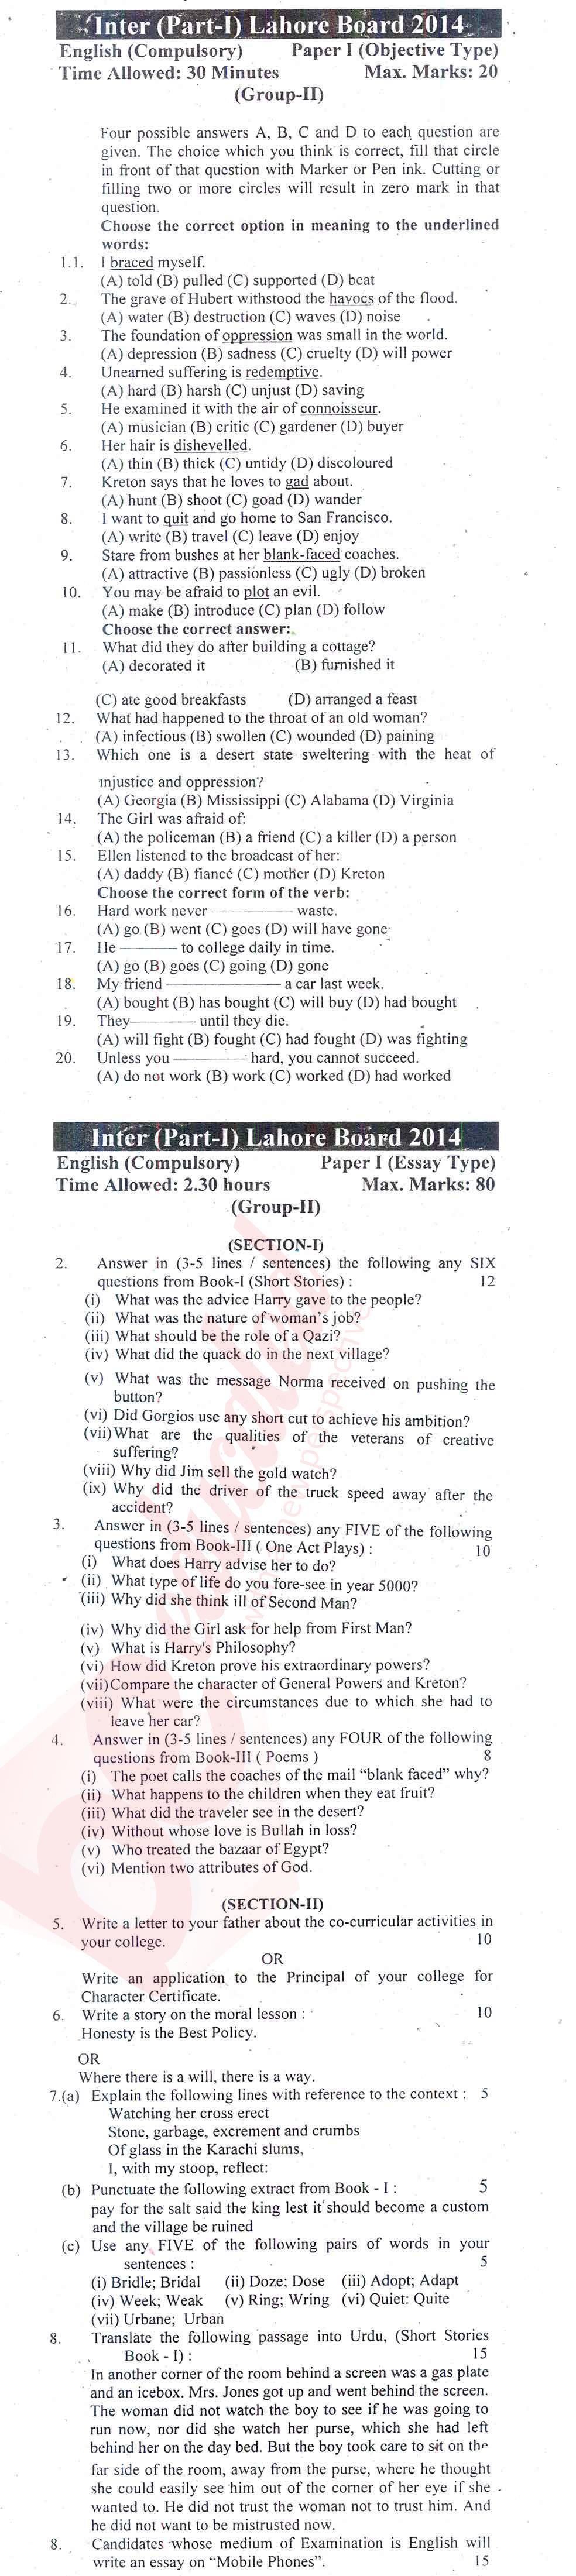 English 11th class Past Paper Group 2 BISE Lahore 2014